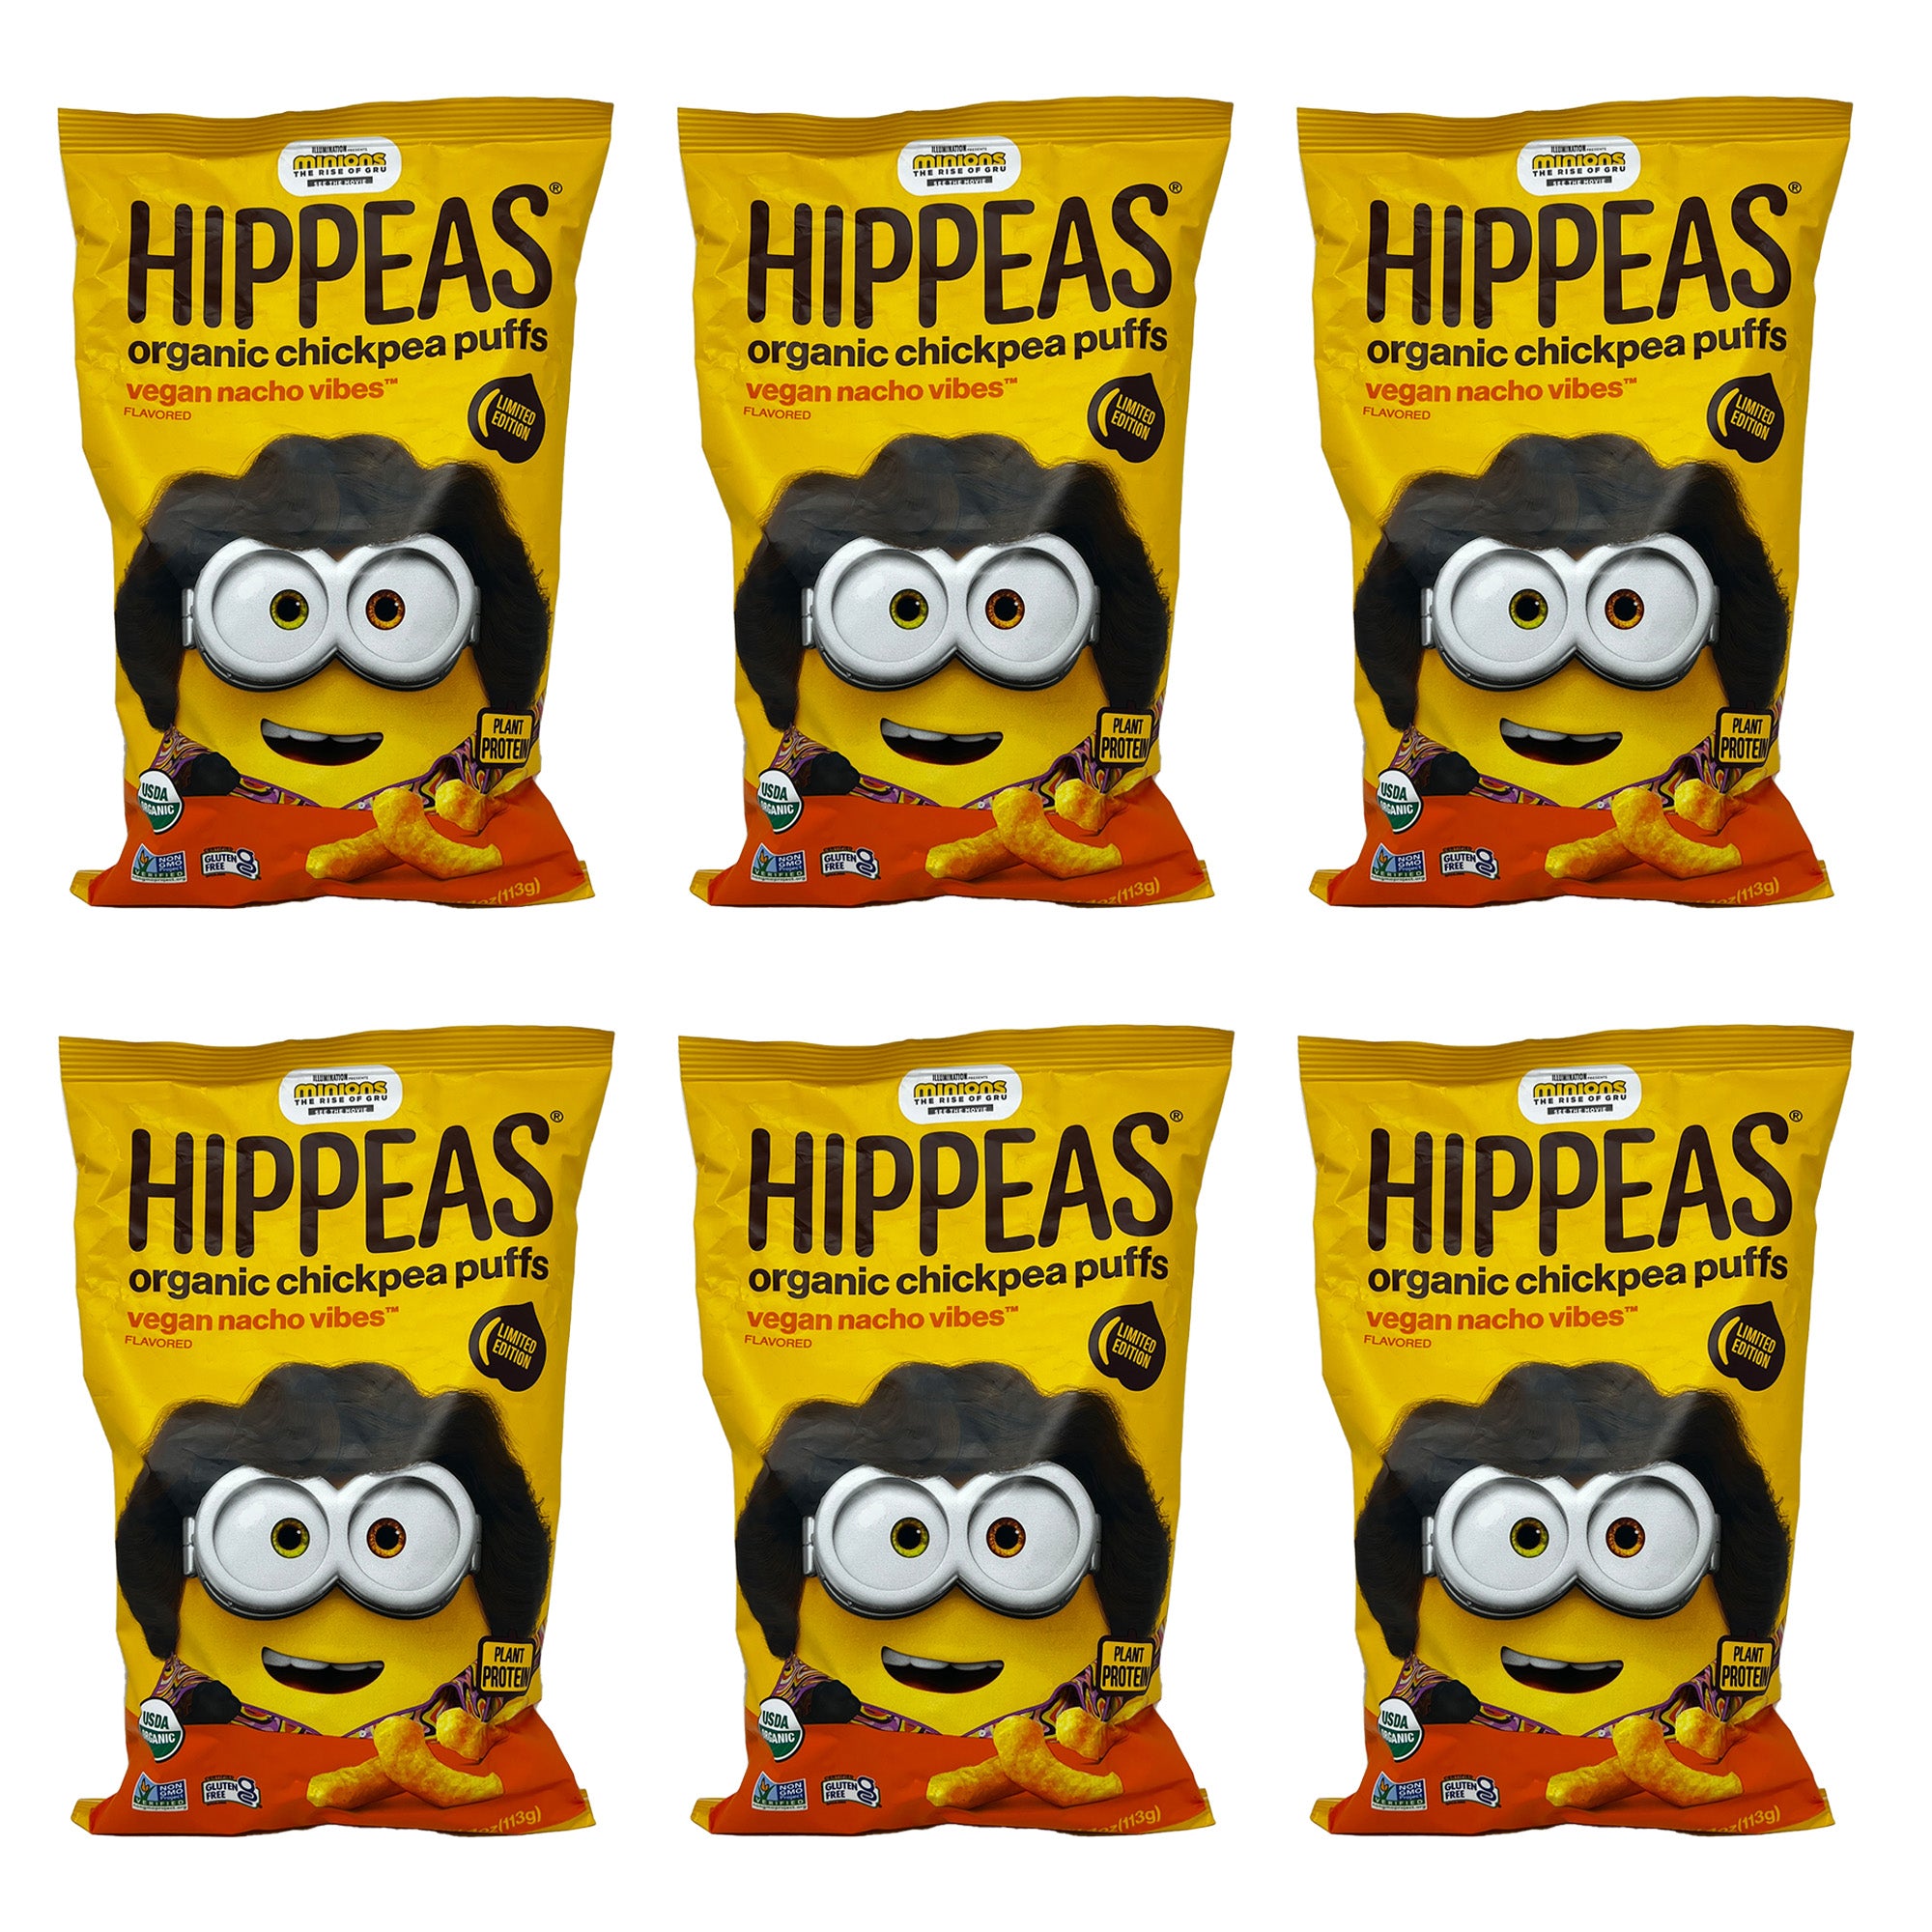 Hippeas Organic Chickpea Puffs, Limited Edition Minions: Rise of Gru, Vegan Nacho Vibes Flavored (6 Pack)